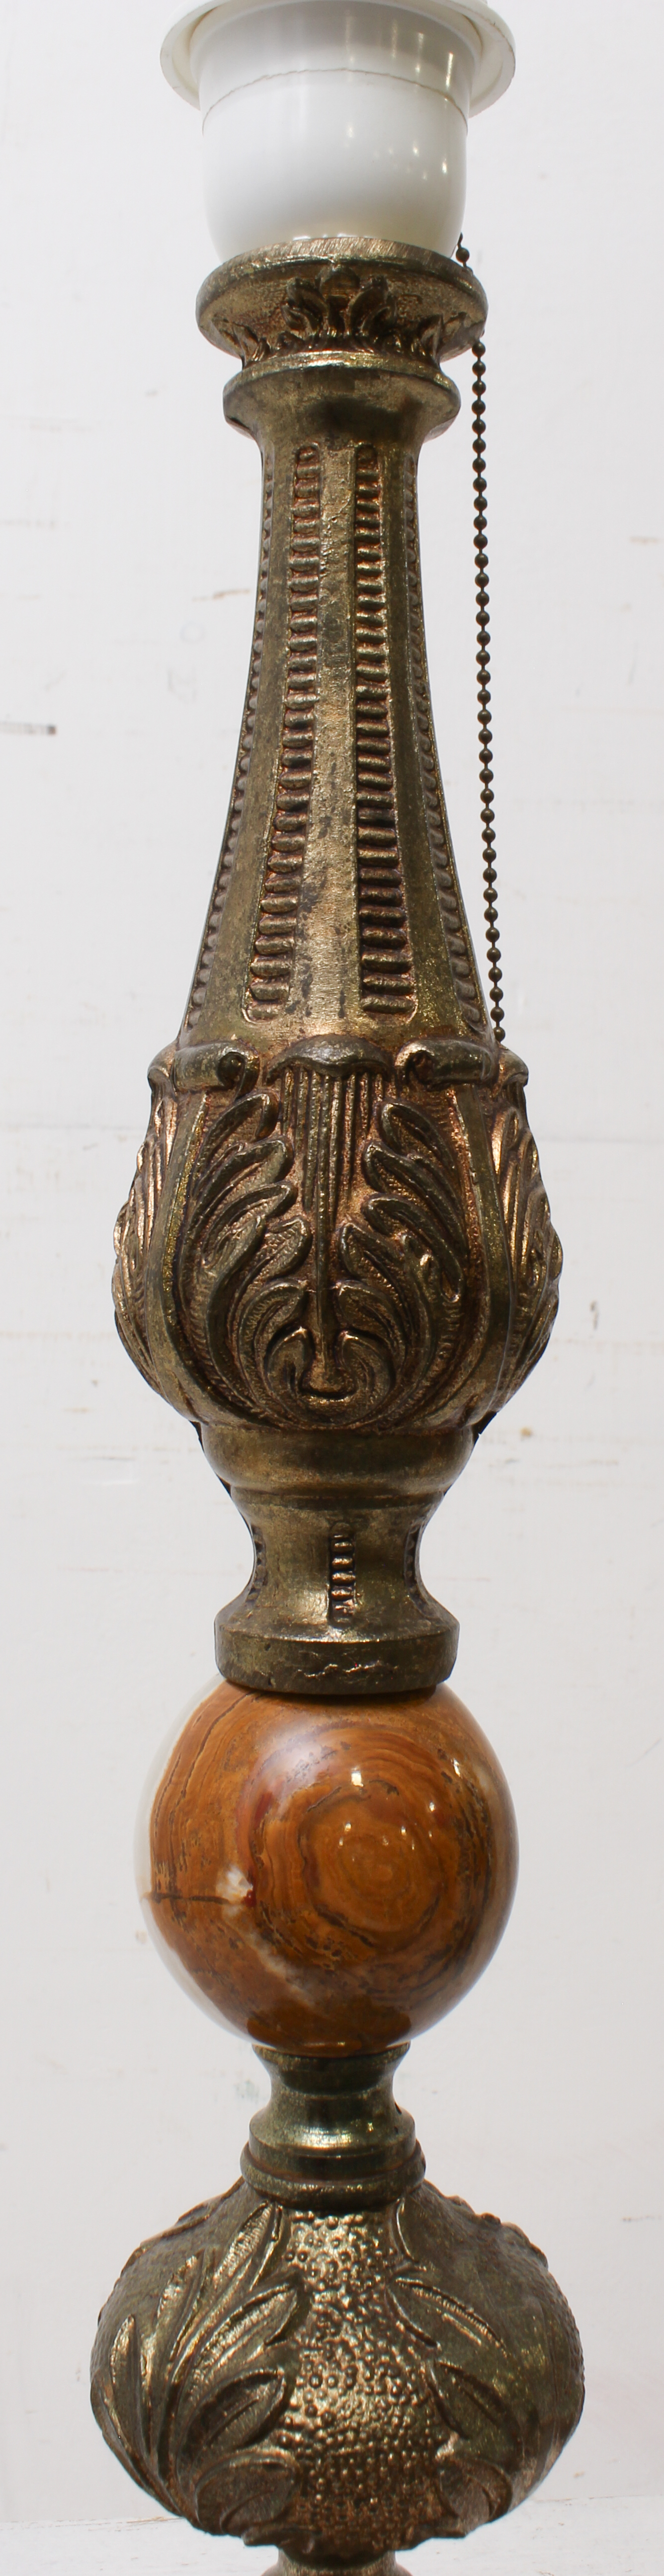 Two antique-style table lamps - one in the style of a Victorian glass and gilt-metal oil lamp, - Image 6 of 10